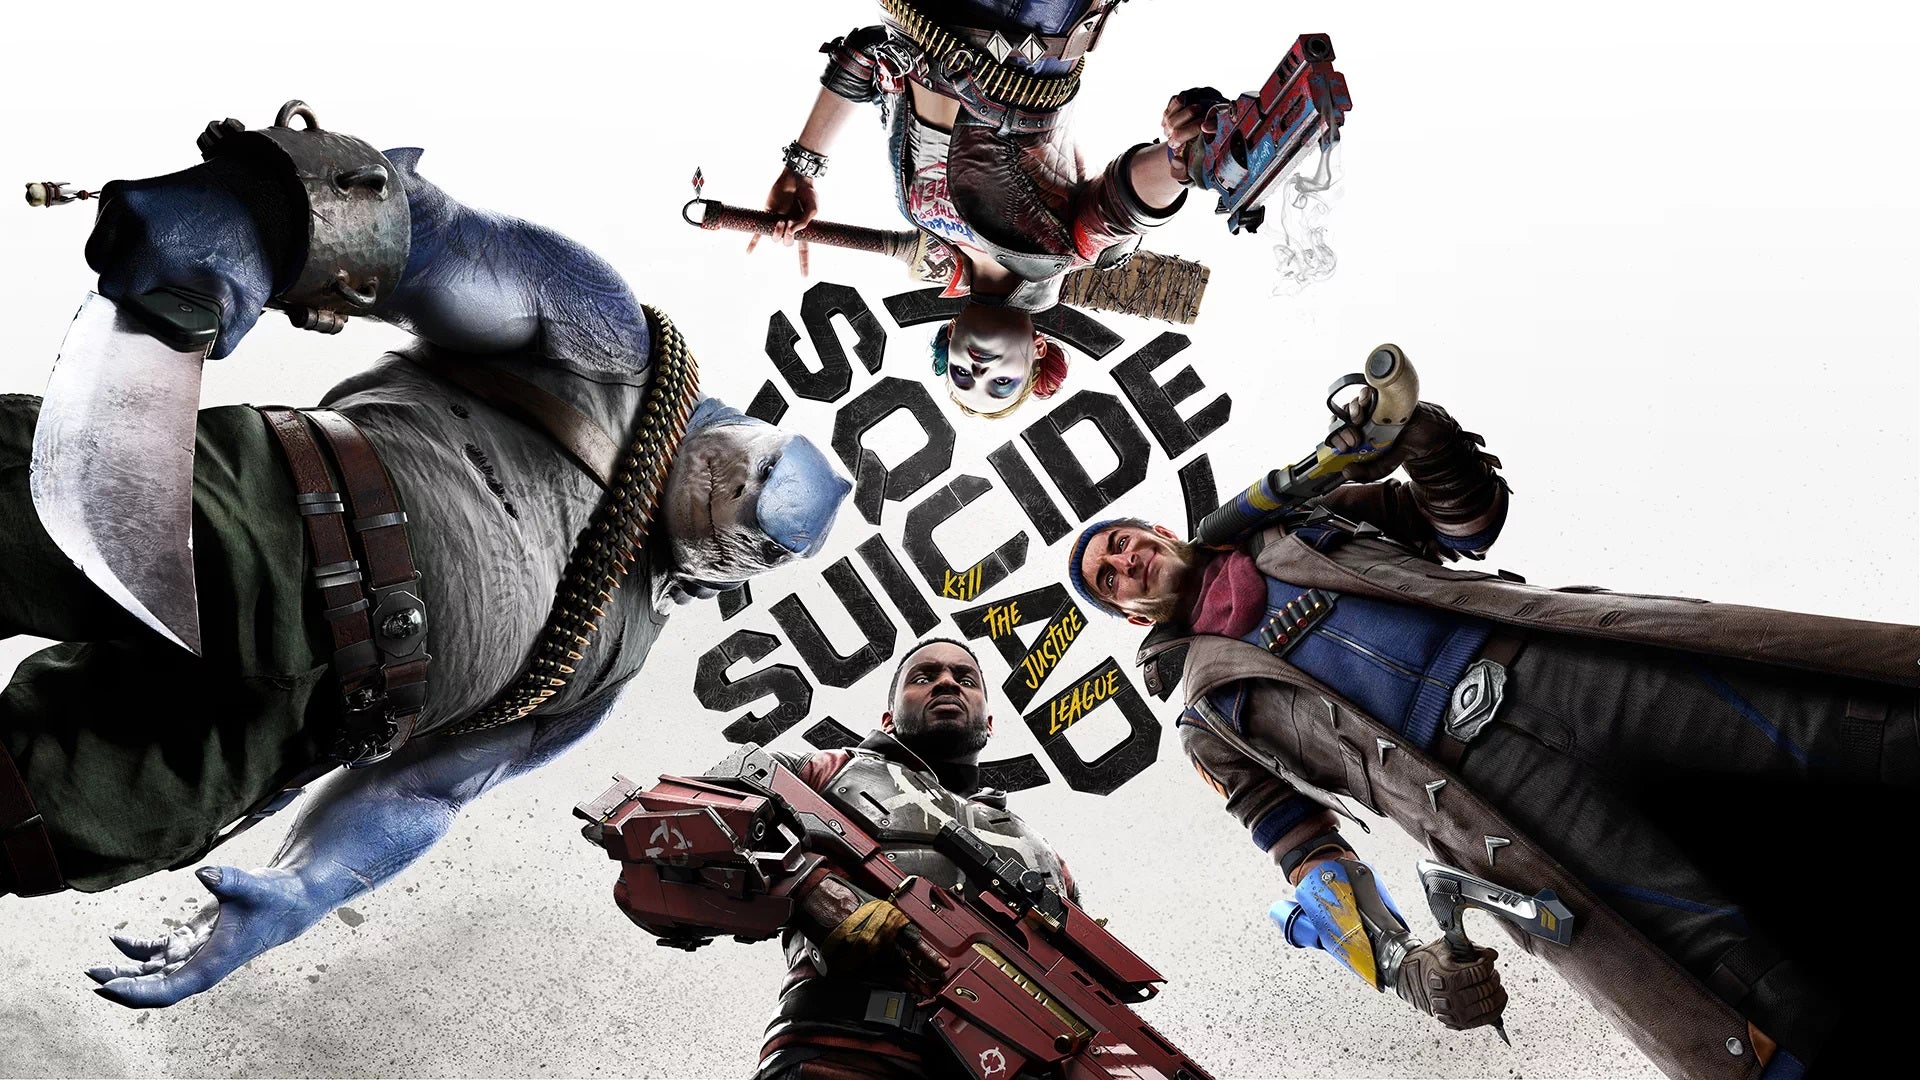 Key art from Suicide Squad: Kill the Justice League. Harley Quinn, Captain Boomerang, Deadshot, and King Shark glare menacingly down at the viewer from a POV on the floor.